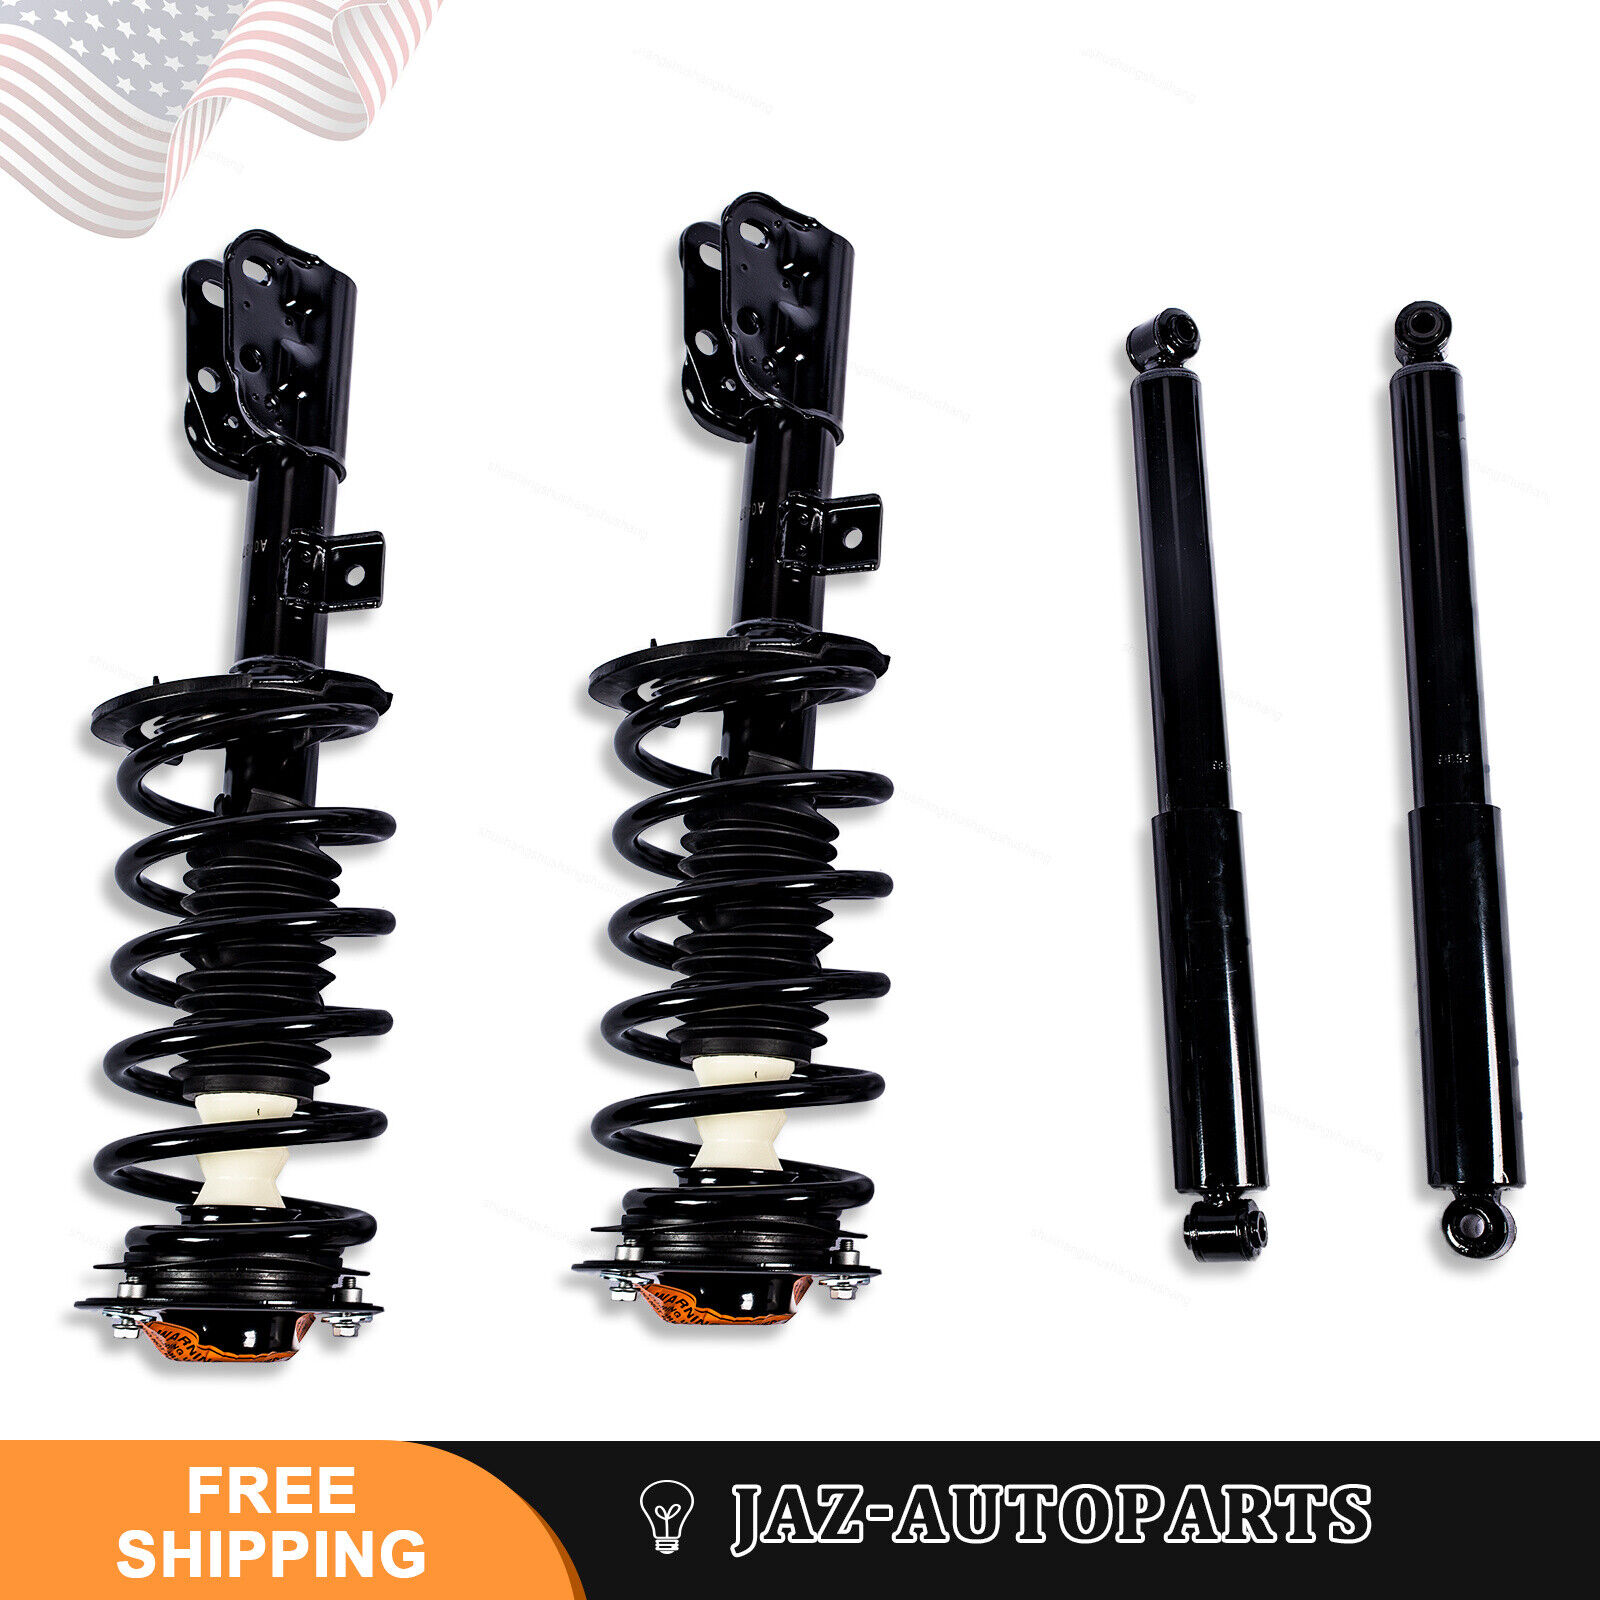 4 Pack Front Rear Shock Struts Fit For 2010-2017 Chevrolet Equinox